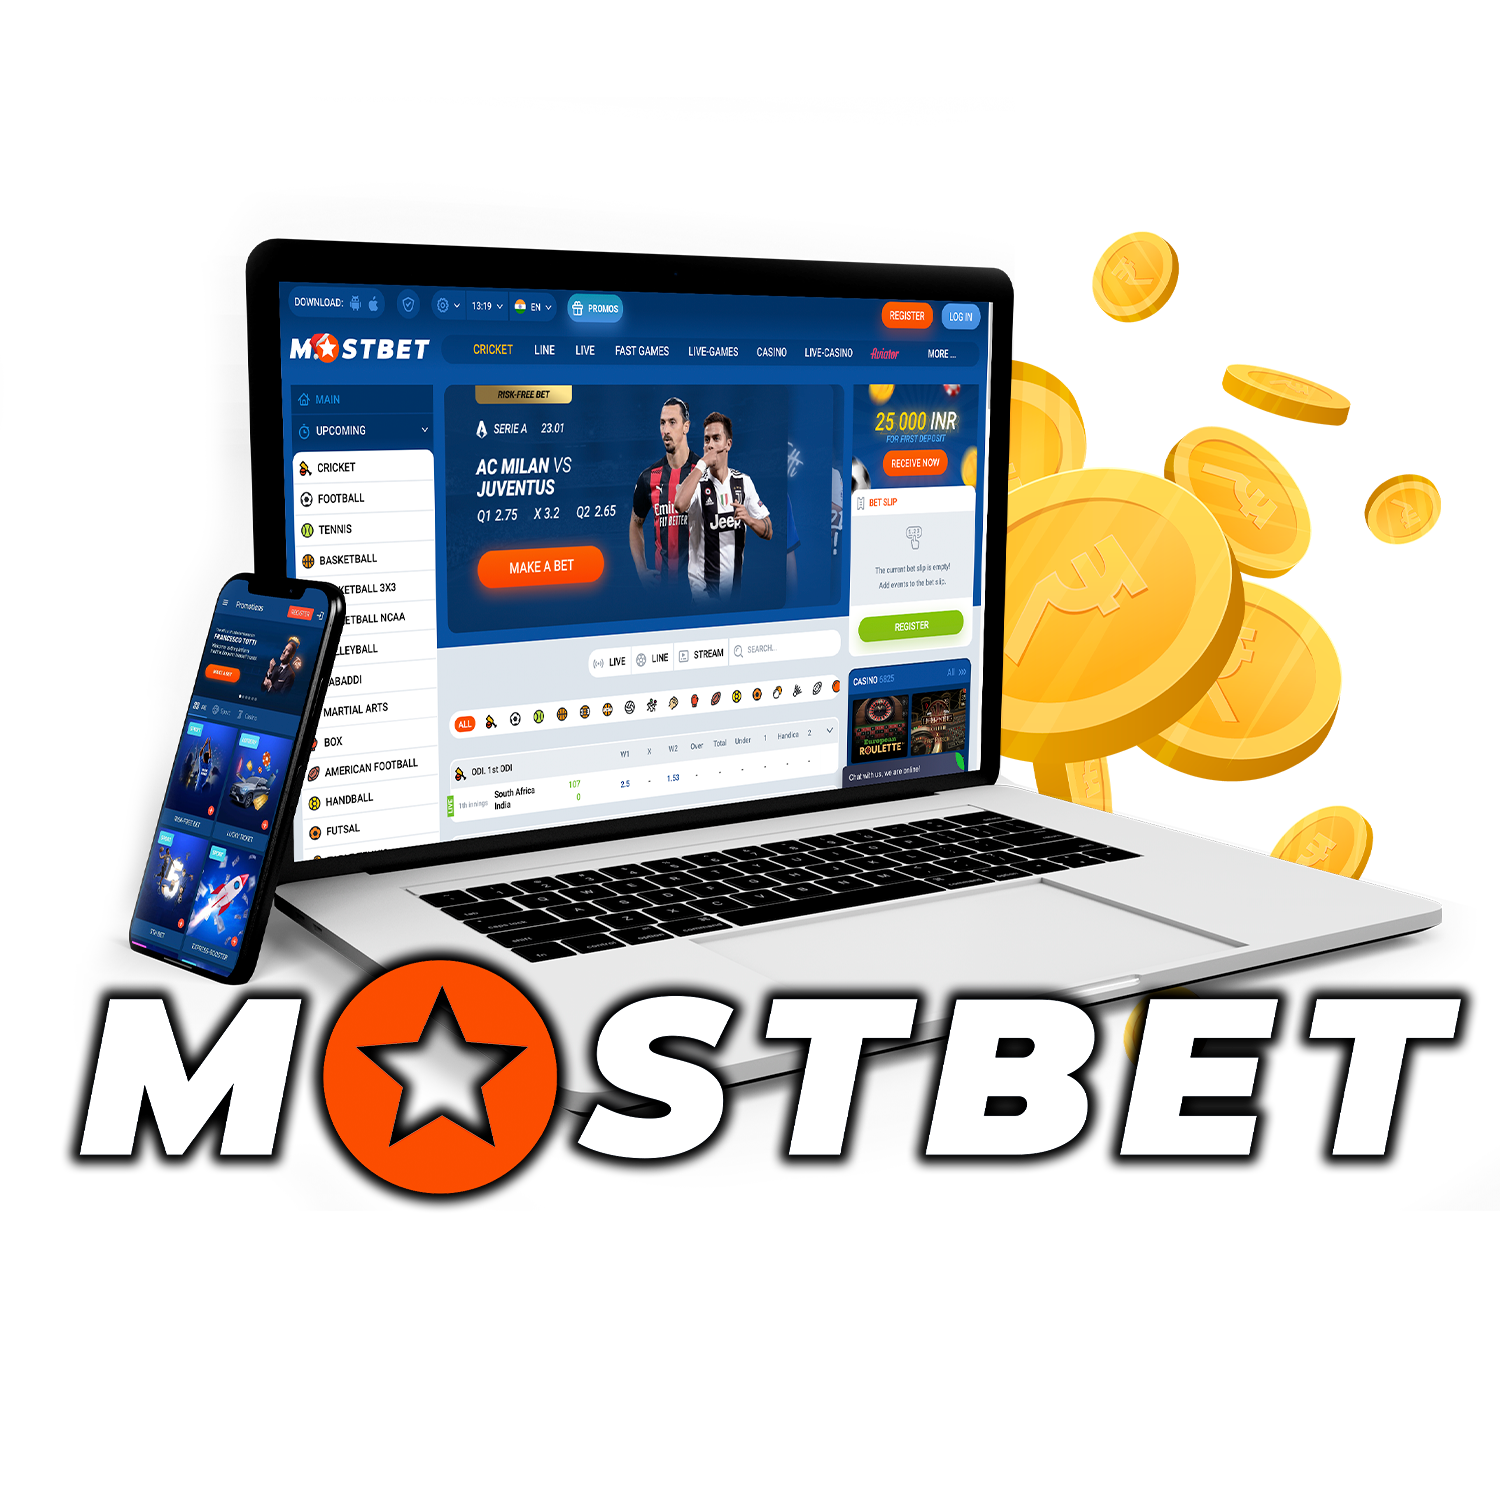 Mostbet Bookmaker and Casino Online in Turkey Helps You Achieve Your Dreams